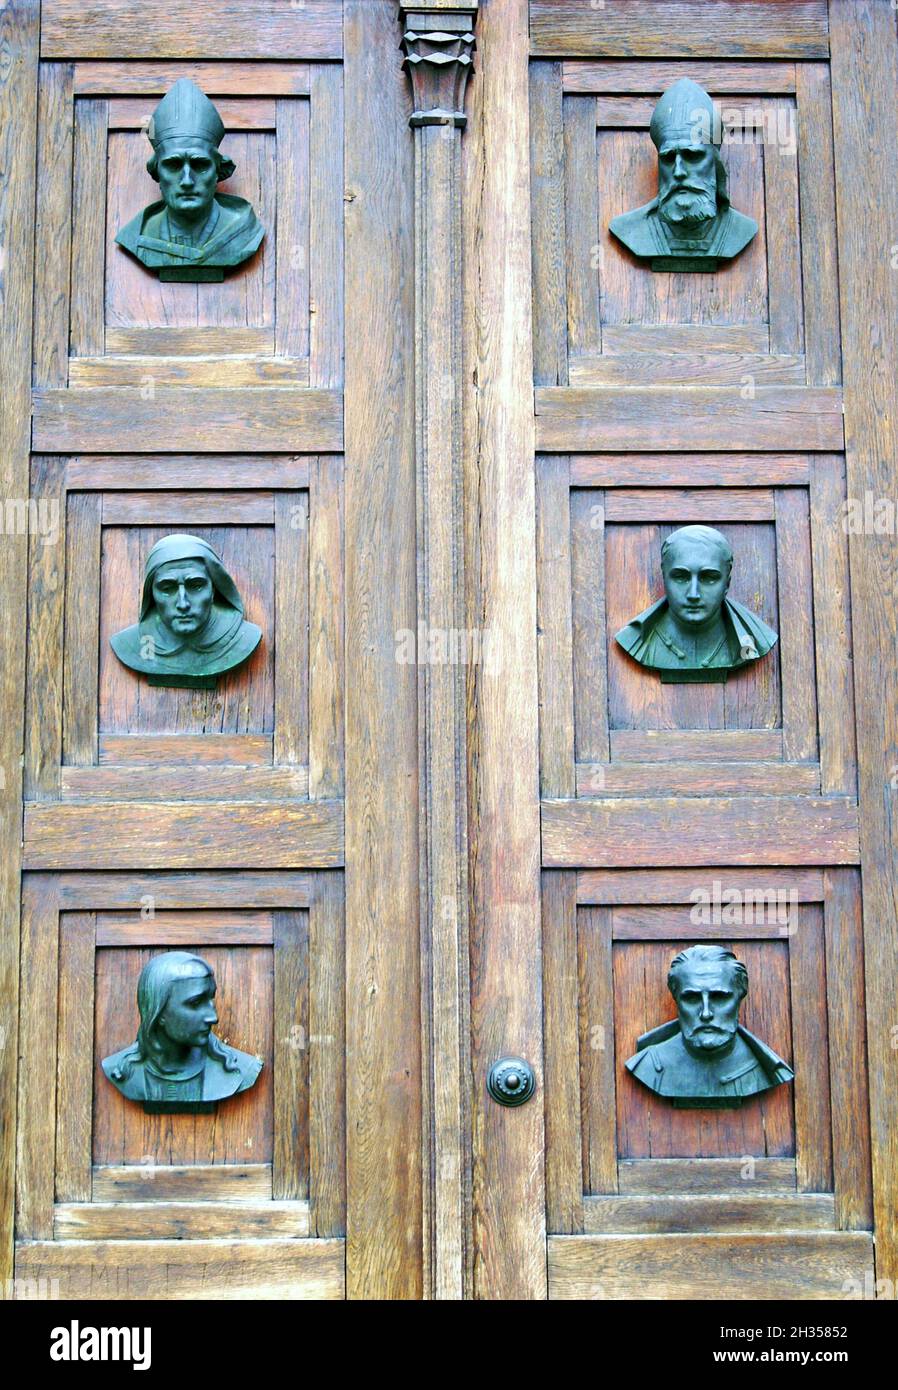 The main door of the Basilica of S. Marriacki, known as St. Mary's Basilica,  is adorned with sculptures depicting heads of apostles, Polish saints and prophets in Krakow, Poland.  The church, re-built in the 14th Century, doors were completed in 1929 with the sculptures created by Karol Hukan. Stock Photo